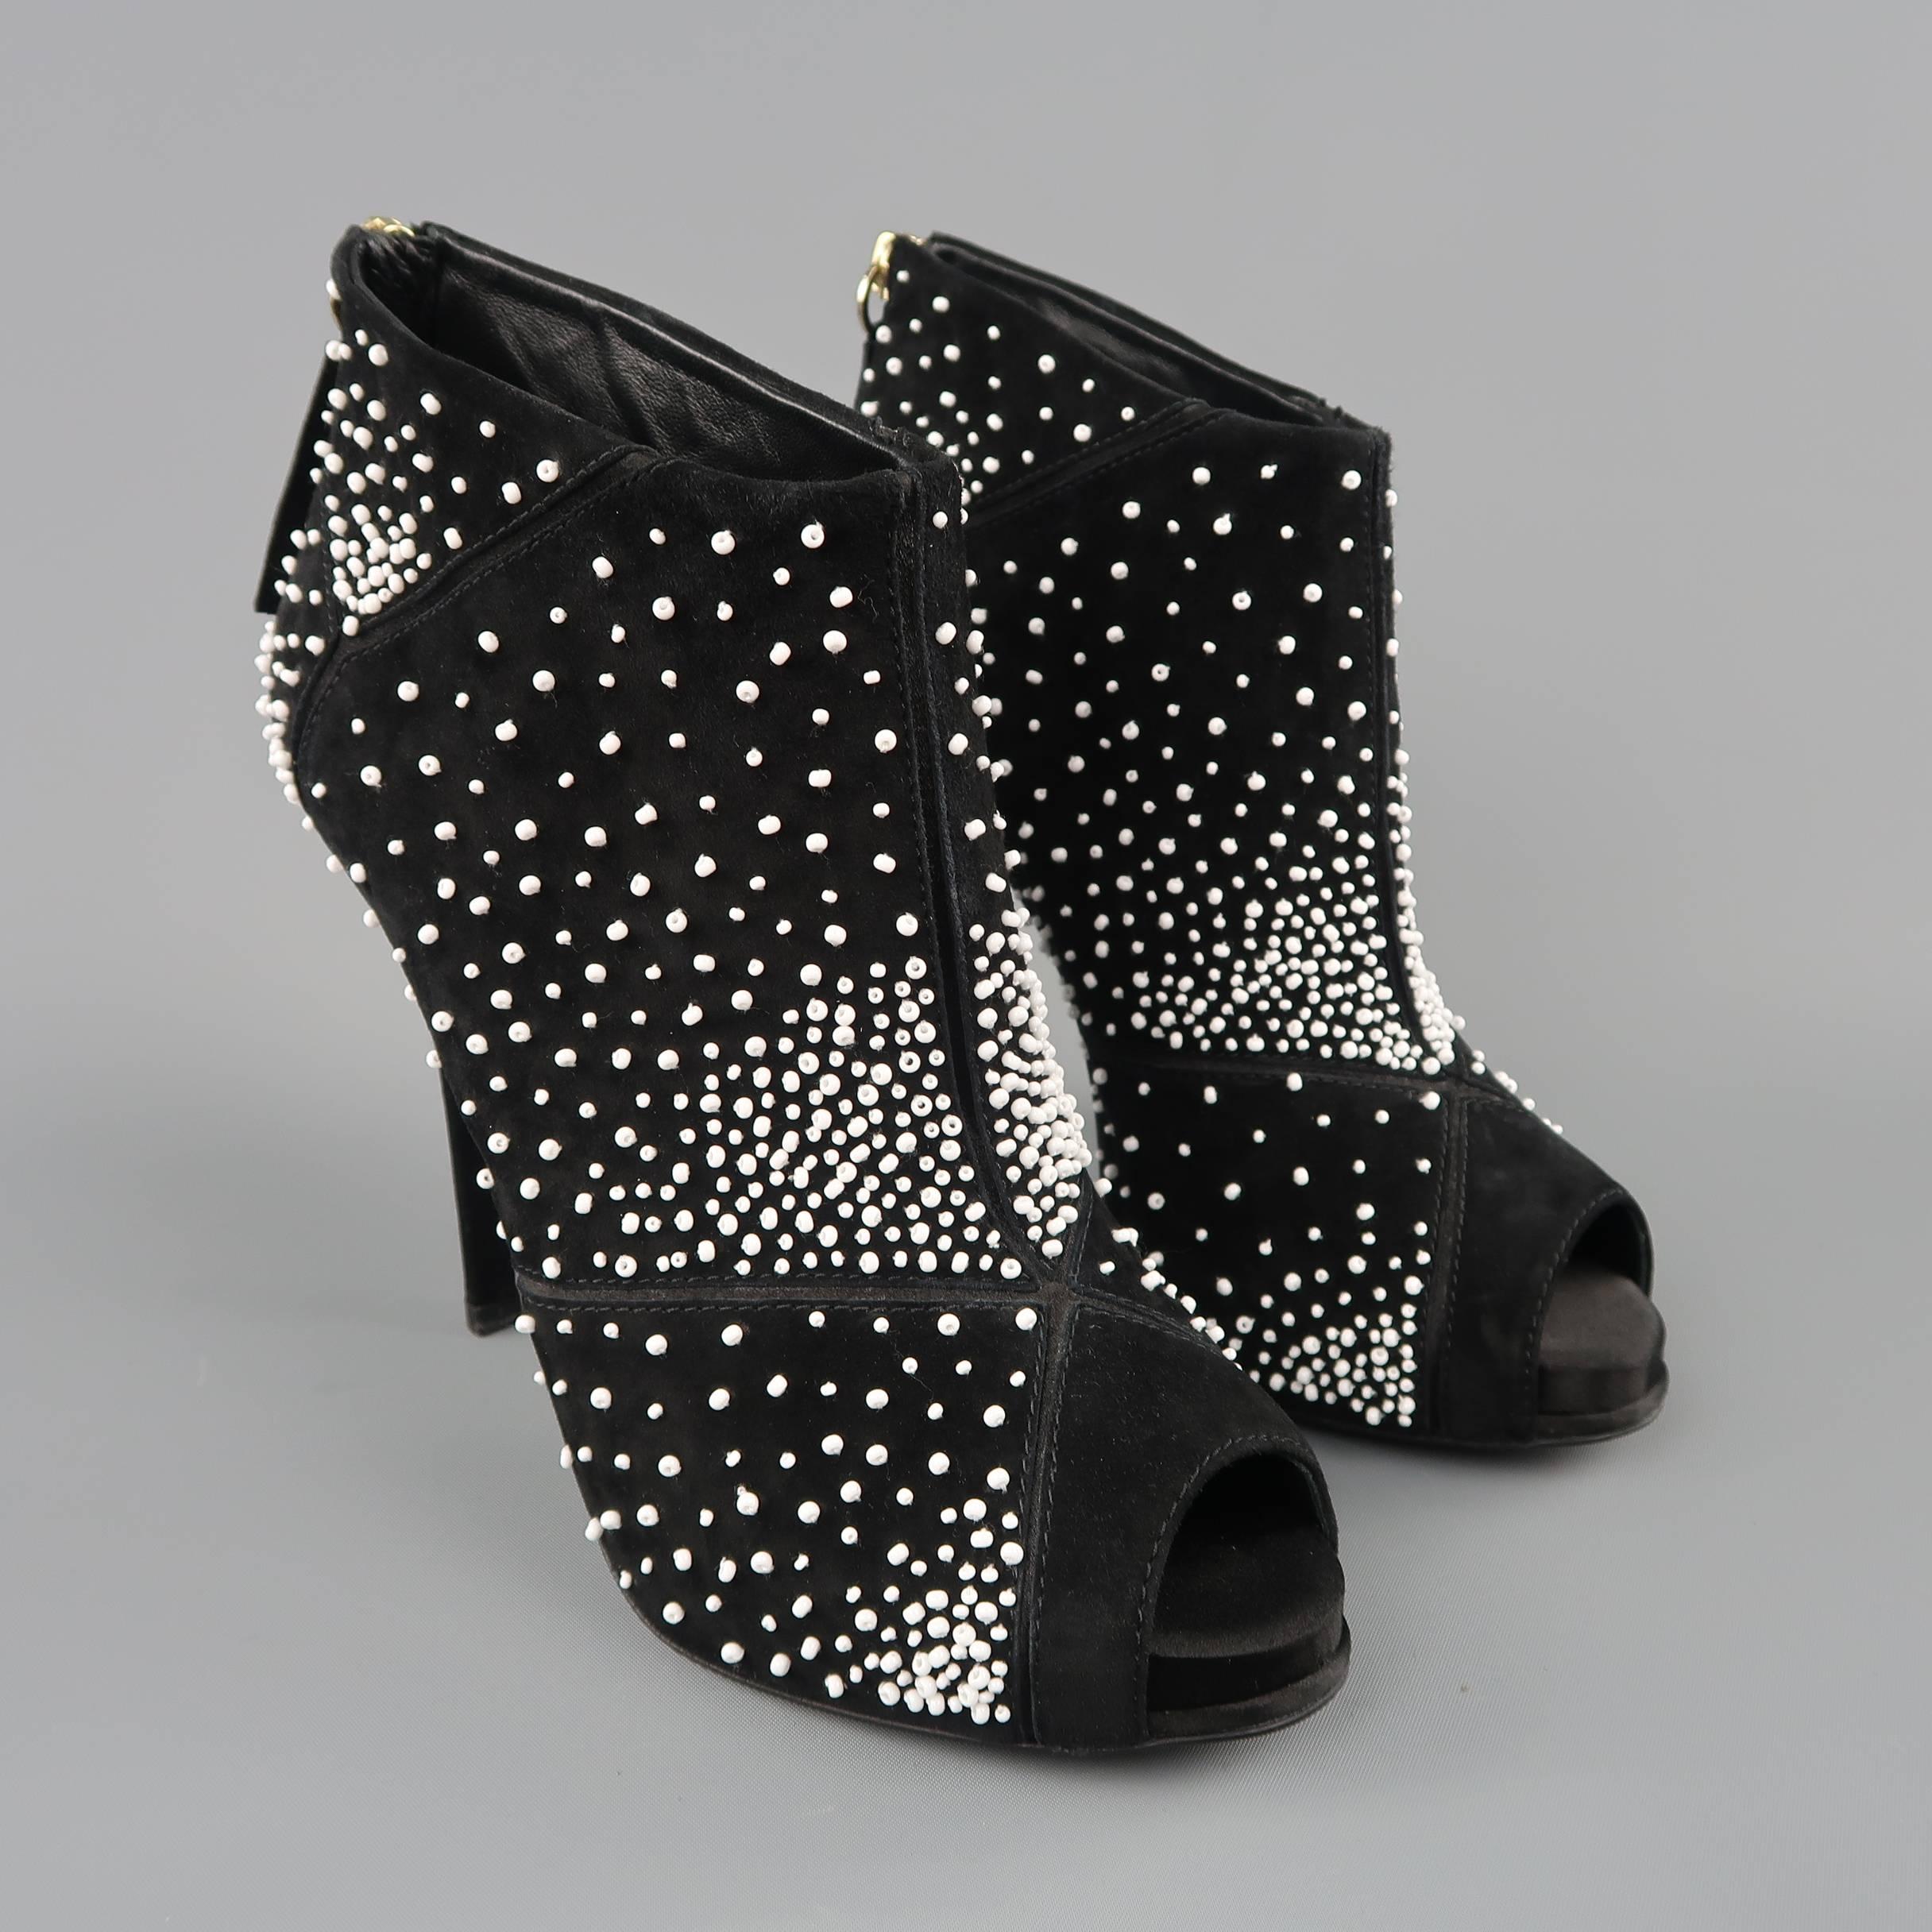 ROGER VIVIER booties come in black suede with silk satin details, peep toe, covered stiletto heel, and patchwork panels with white beadwork throughout. Worn once. Made in Italy.
 
Excellent Pre-Owned Condition.
Marked: IT 38.5
 
Heel: 4.5 in.
